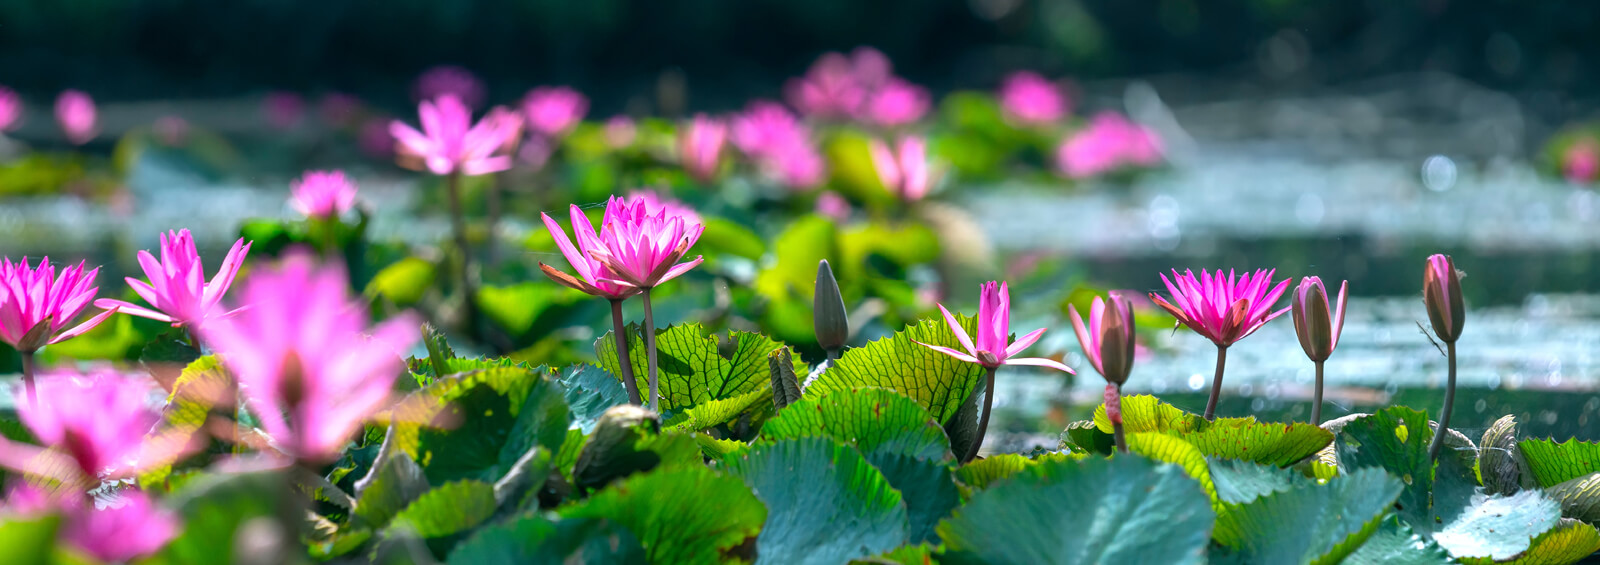 Water Lilies Bloom In The Pond Is Beautiful. This Is A Flower Th